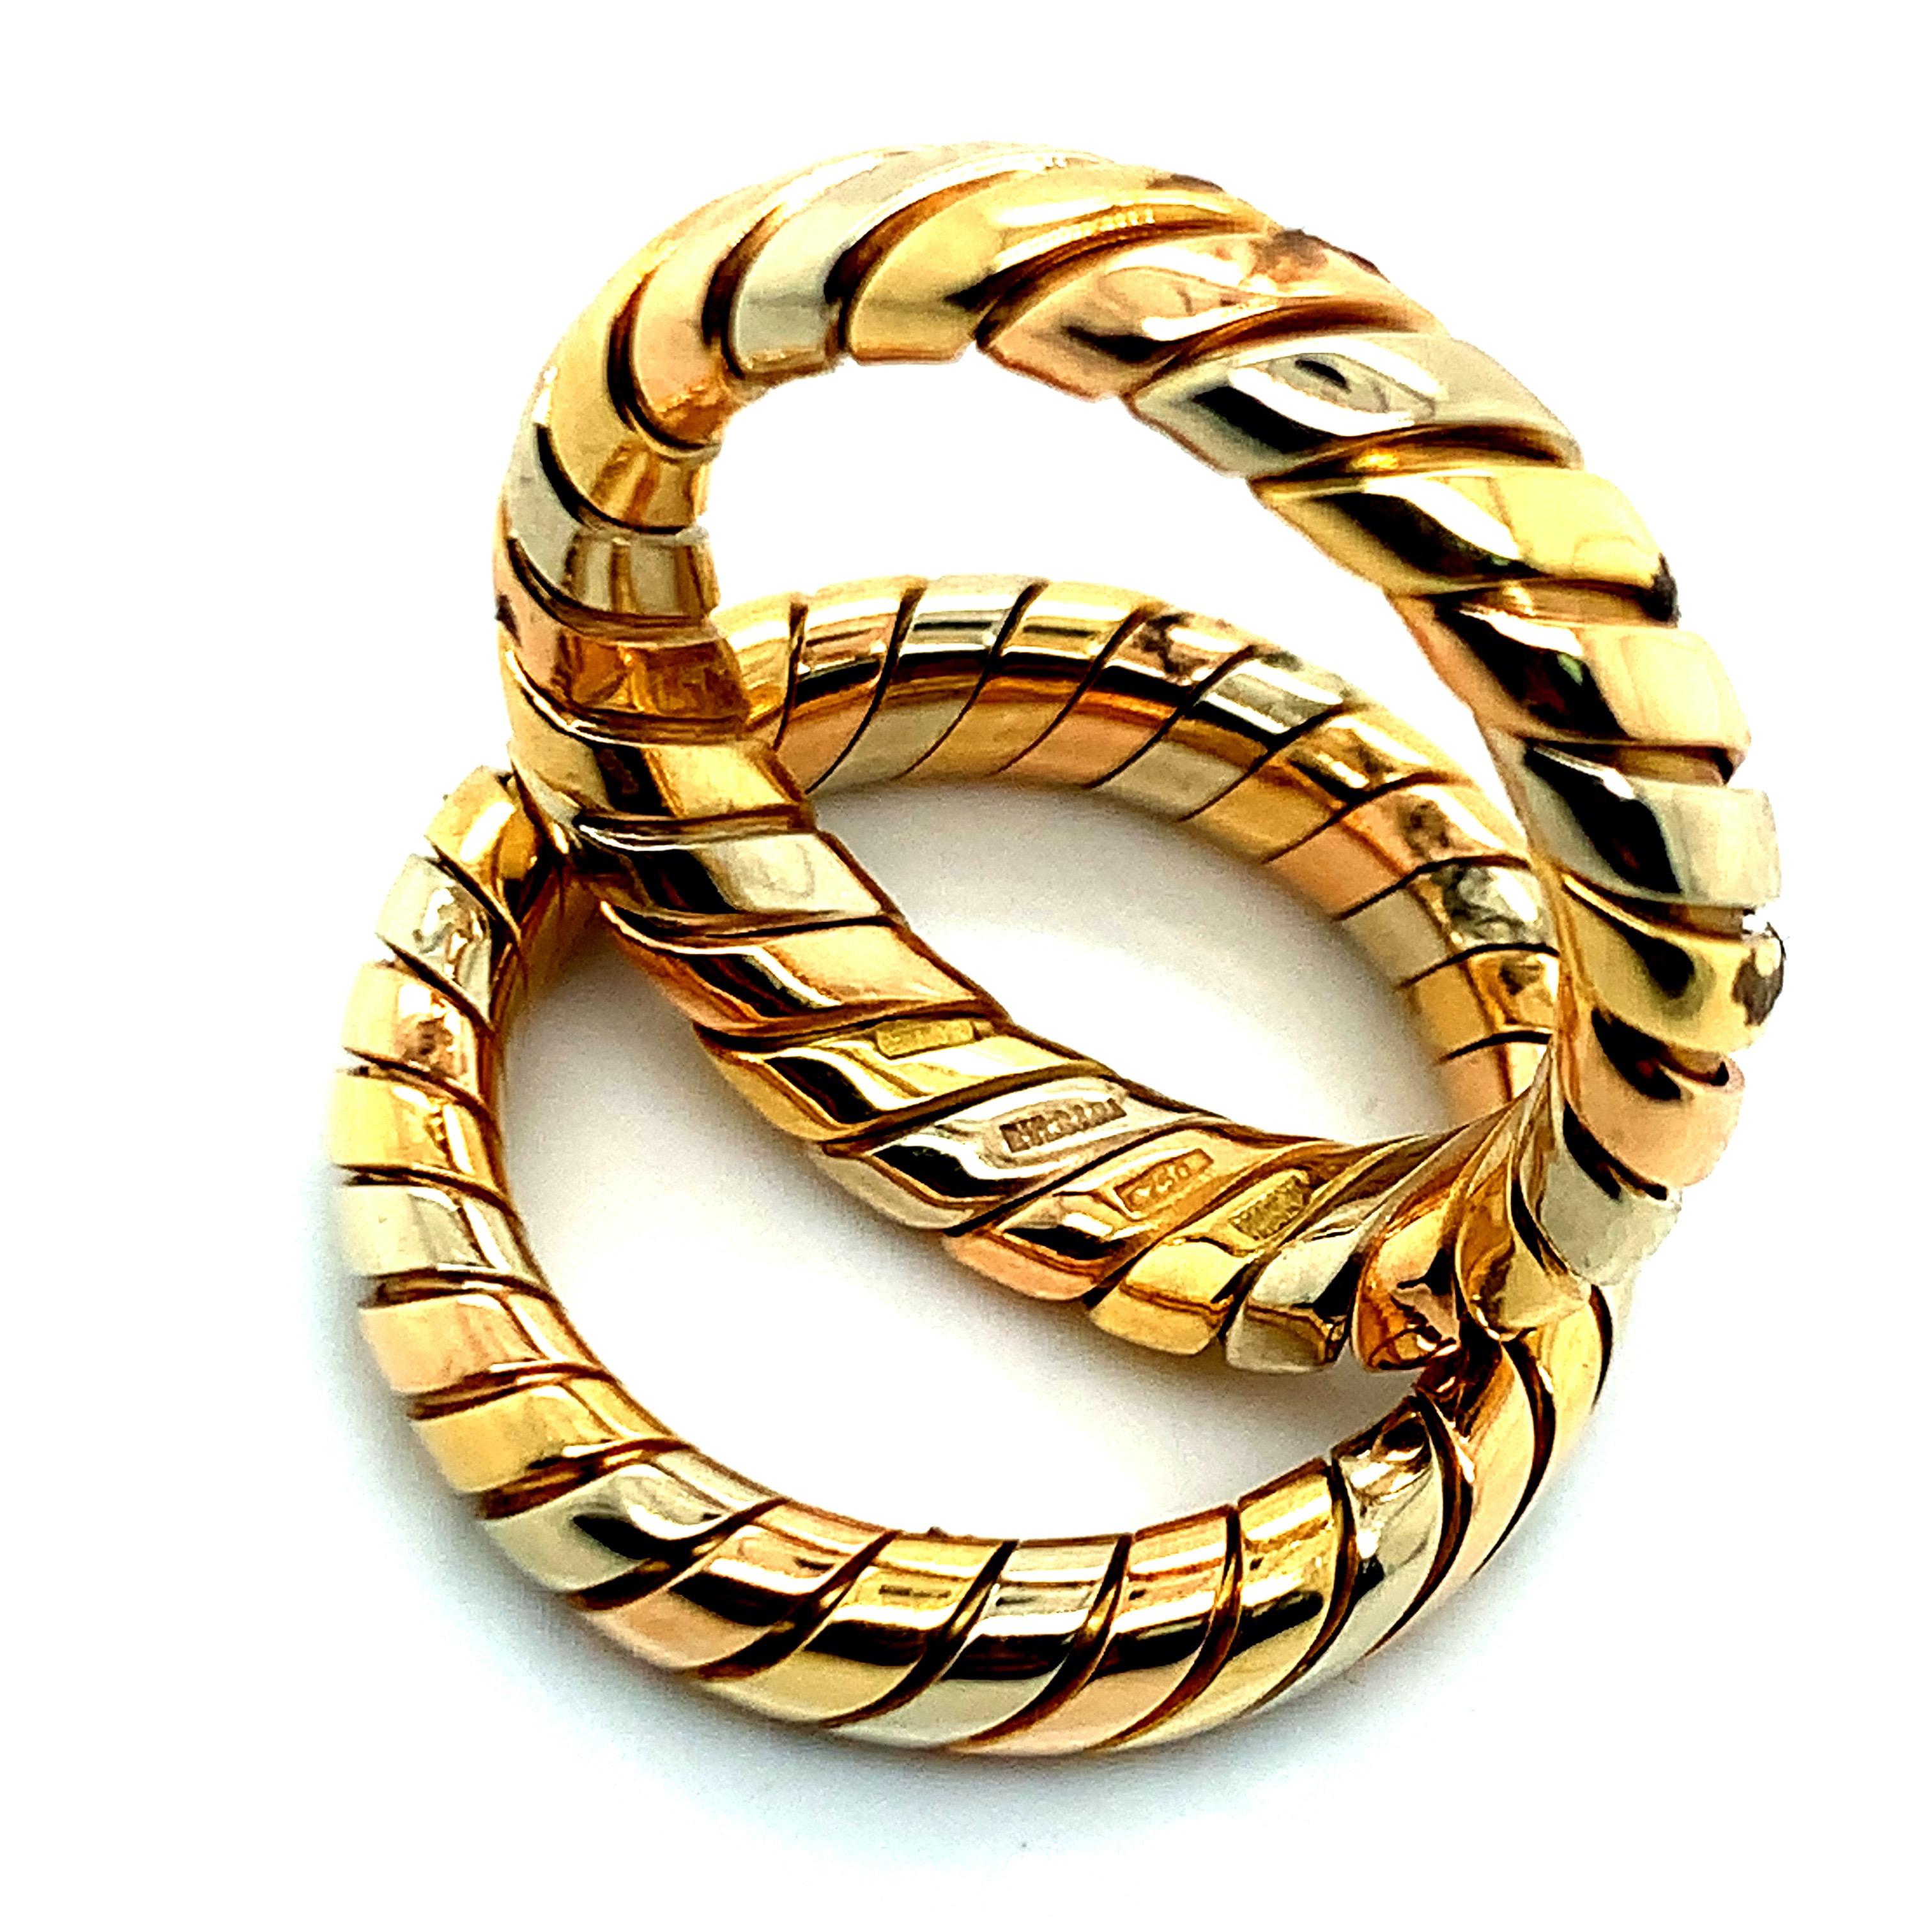 From the Tubogas collection, this set of two Bvlgari rings is made out of three 18 karat gold: yellow, white, and rose. Together, they weigh 13.1 grams. Size 6.5. 